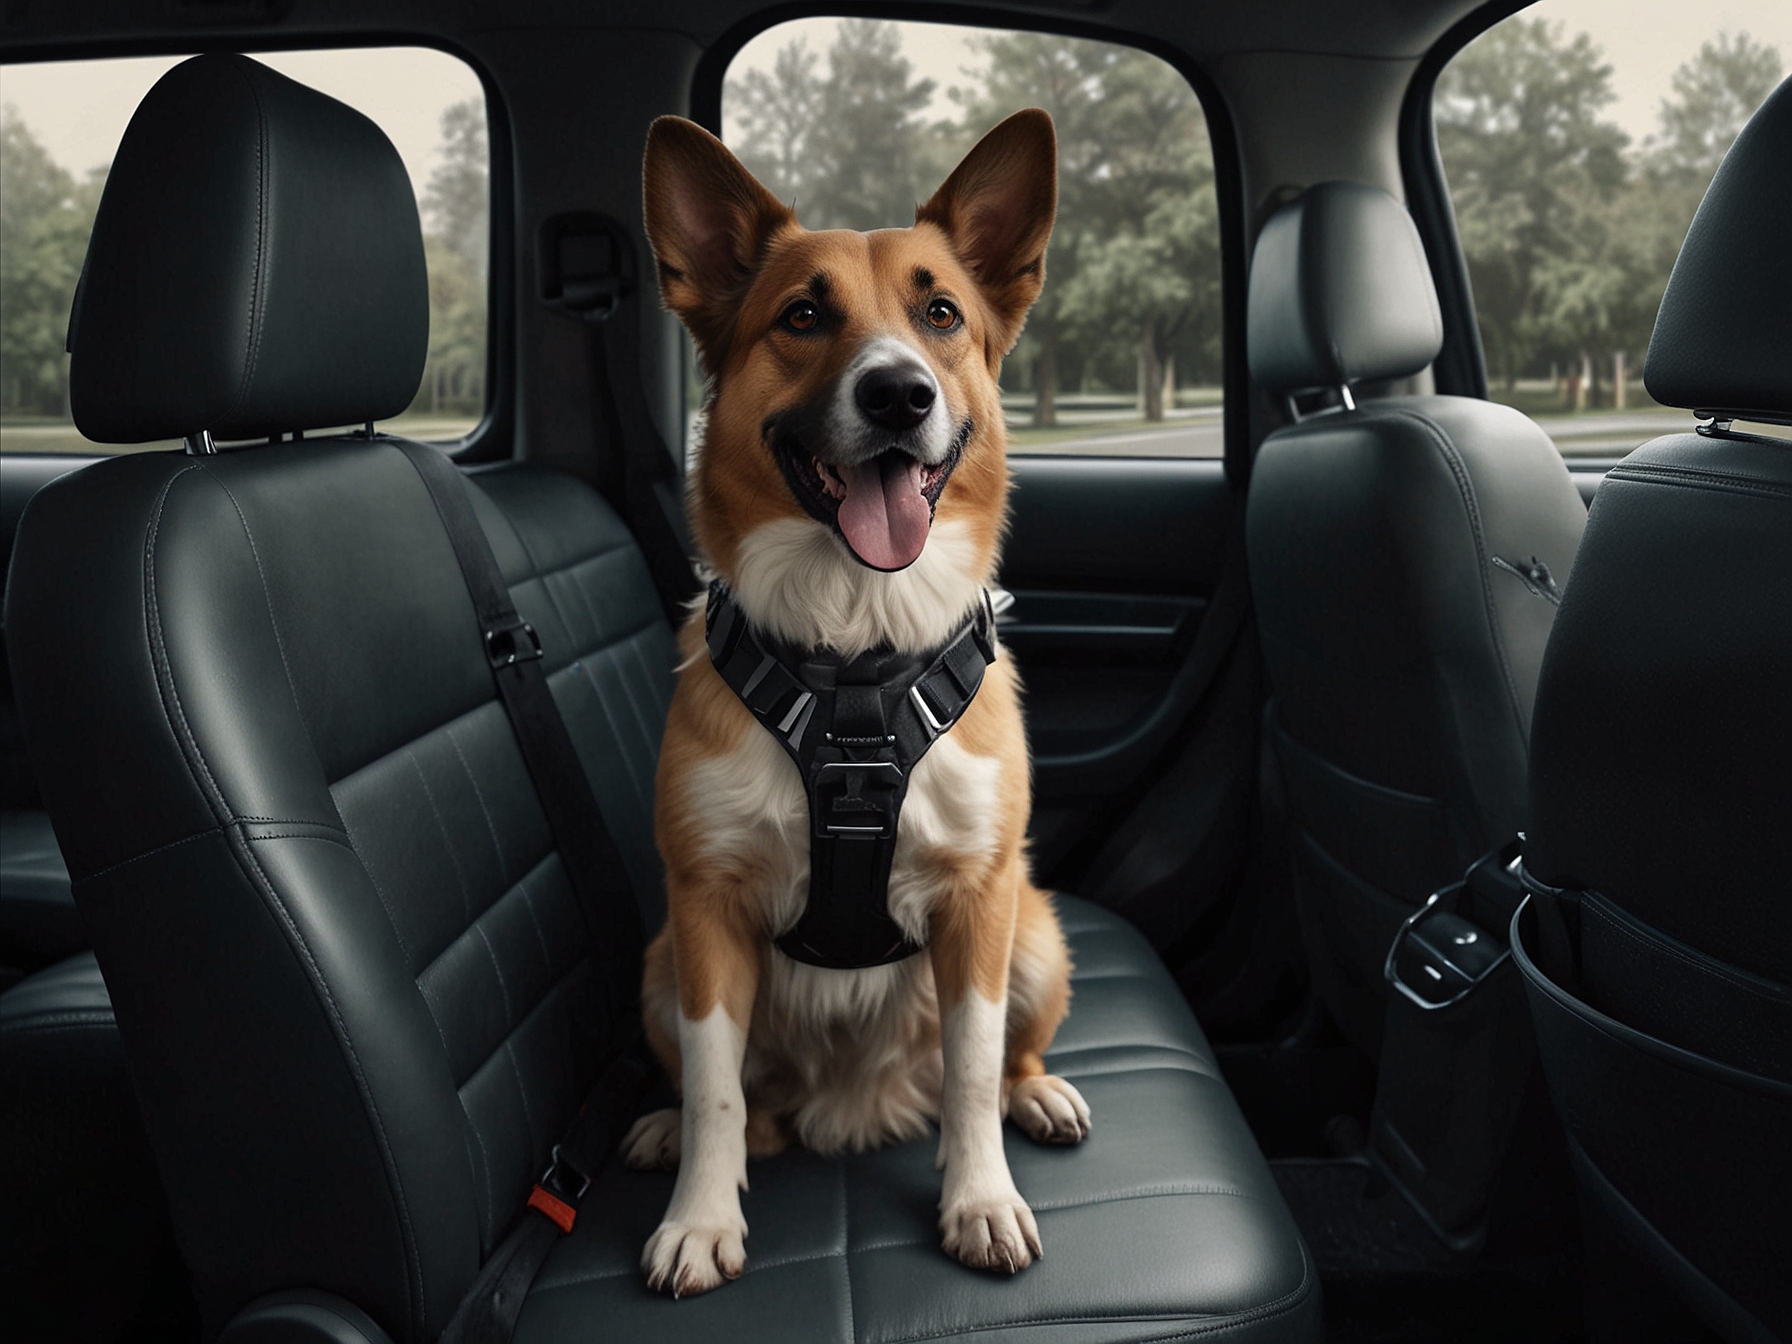 A driver securing a dog with a safety harness in the backseat of a car, emphasizing the importance of proper restraints during travel for pet safety and legal compliance.